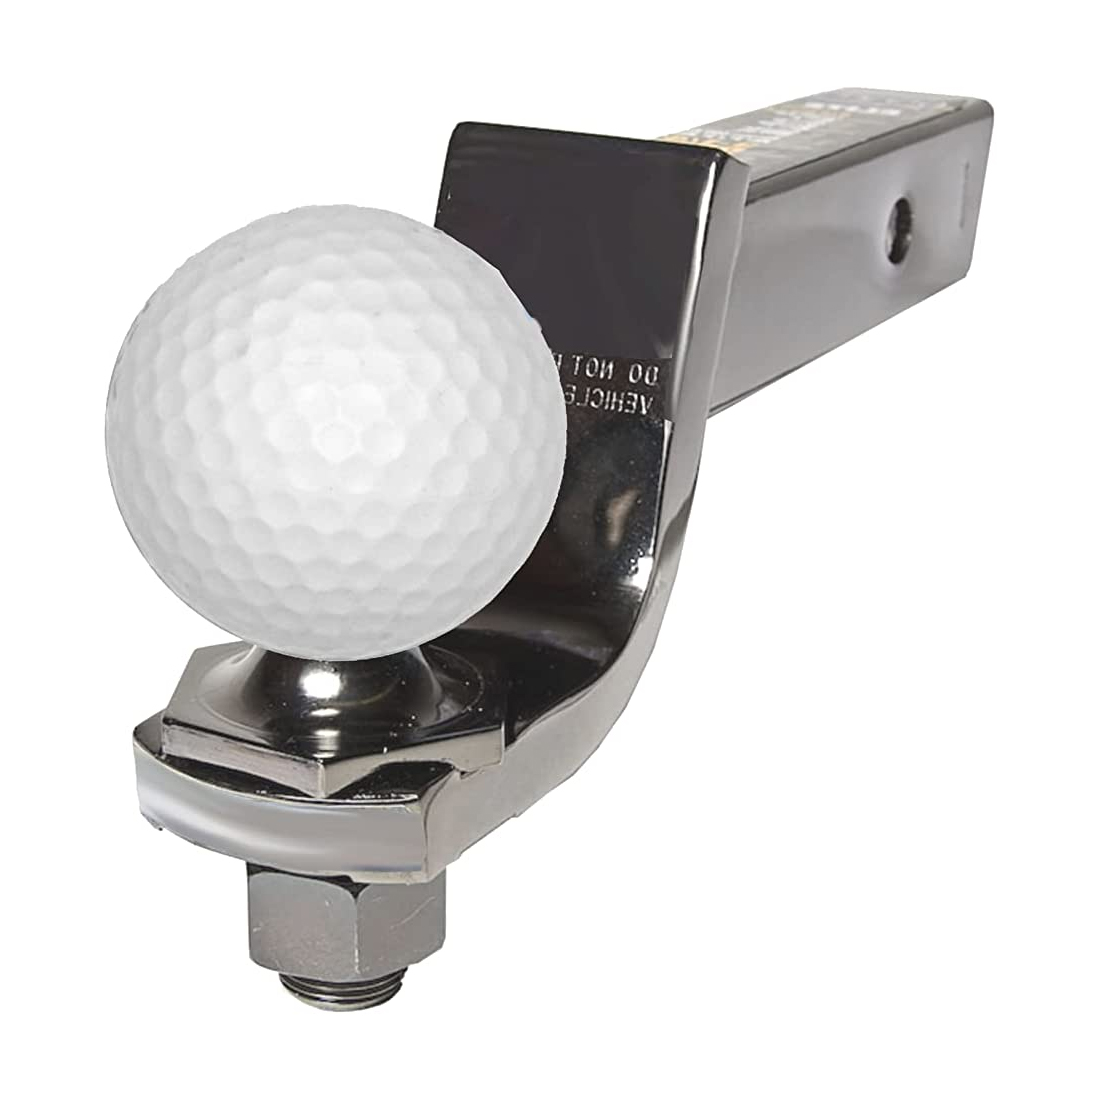 Bully Golf Ball Hitch Cover - Fits 1 7/8" or 2"